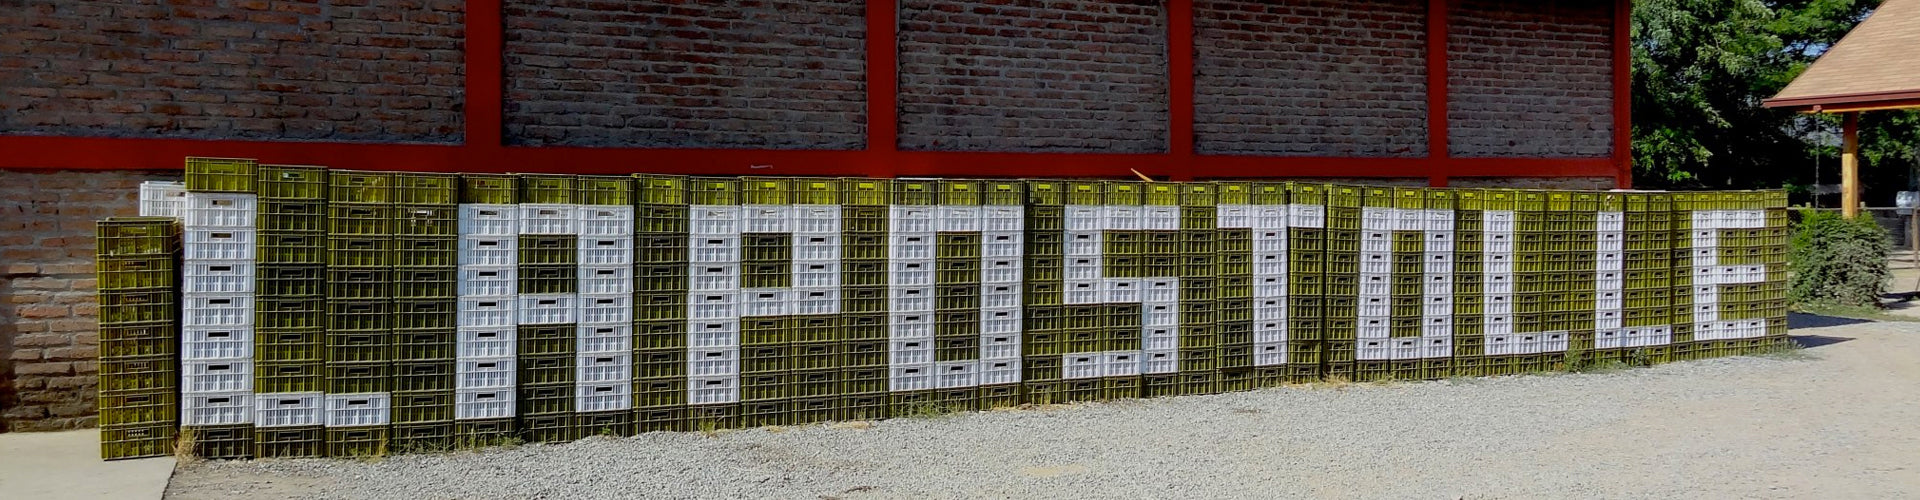 Grape harvest crates stacked in line spelling the word Lapostolle